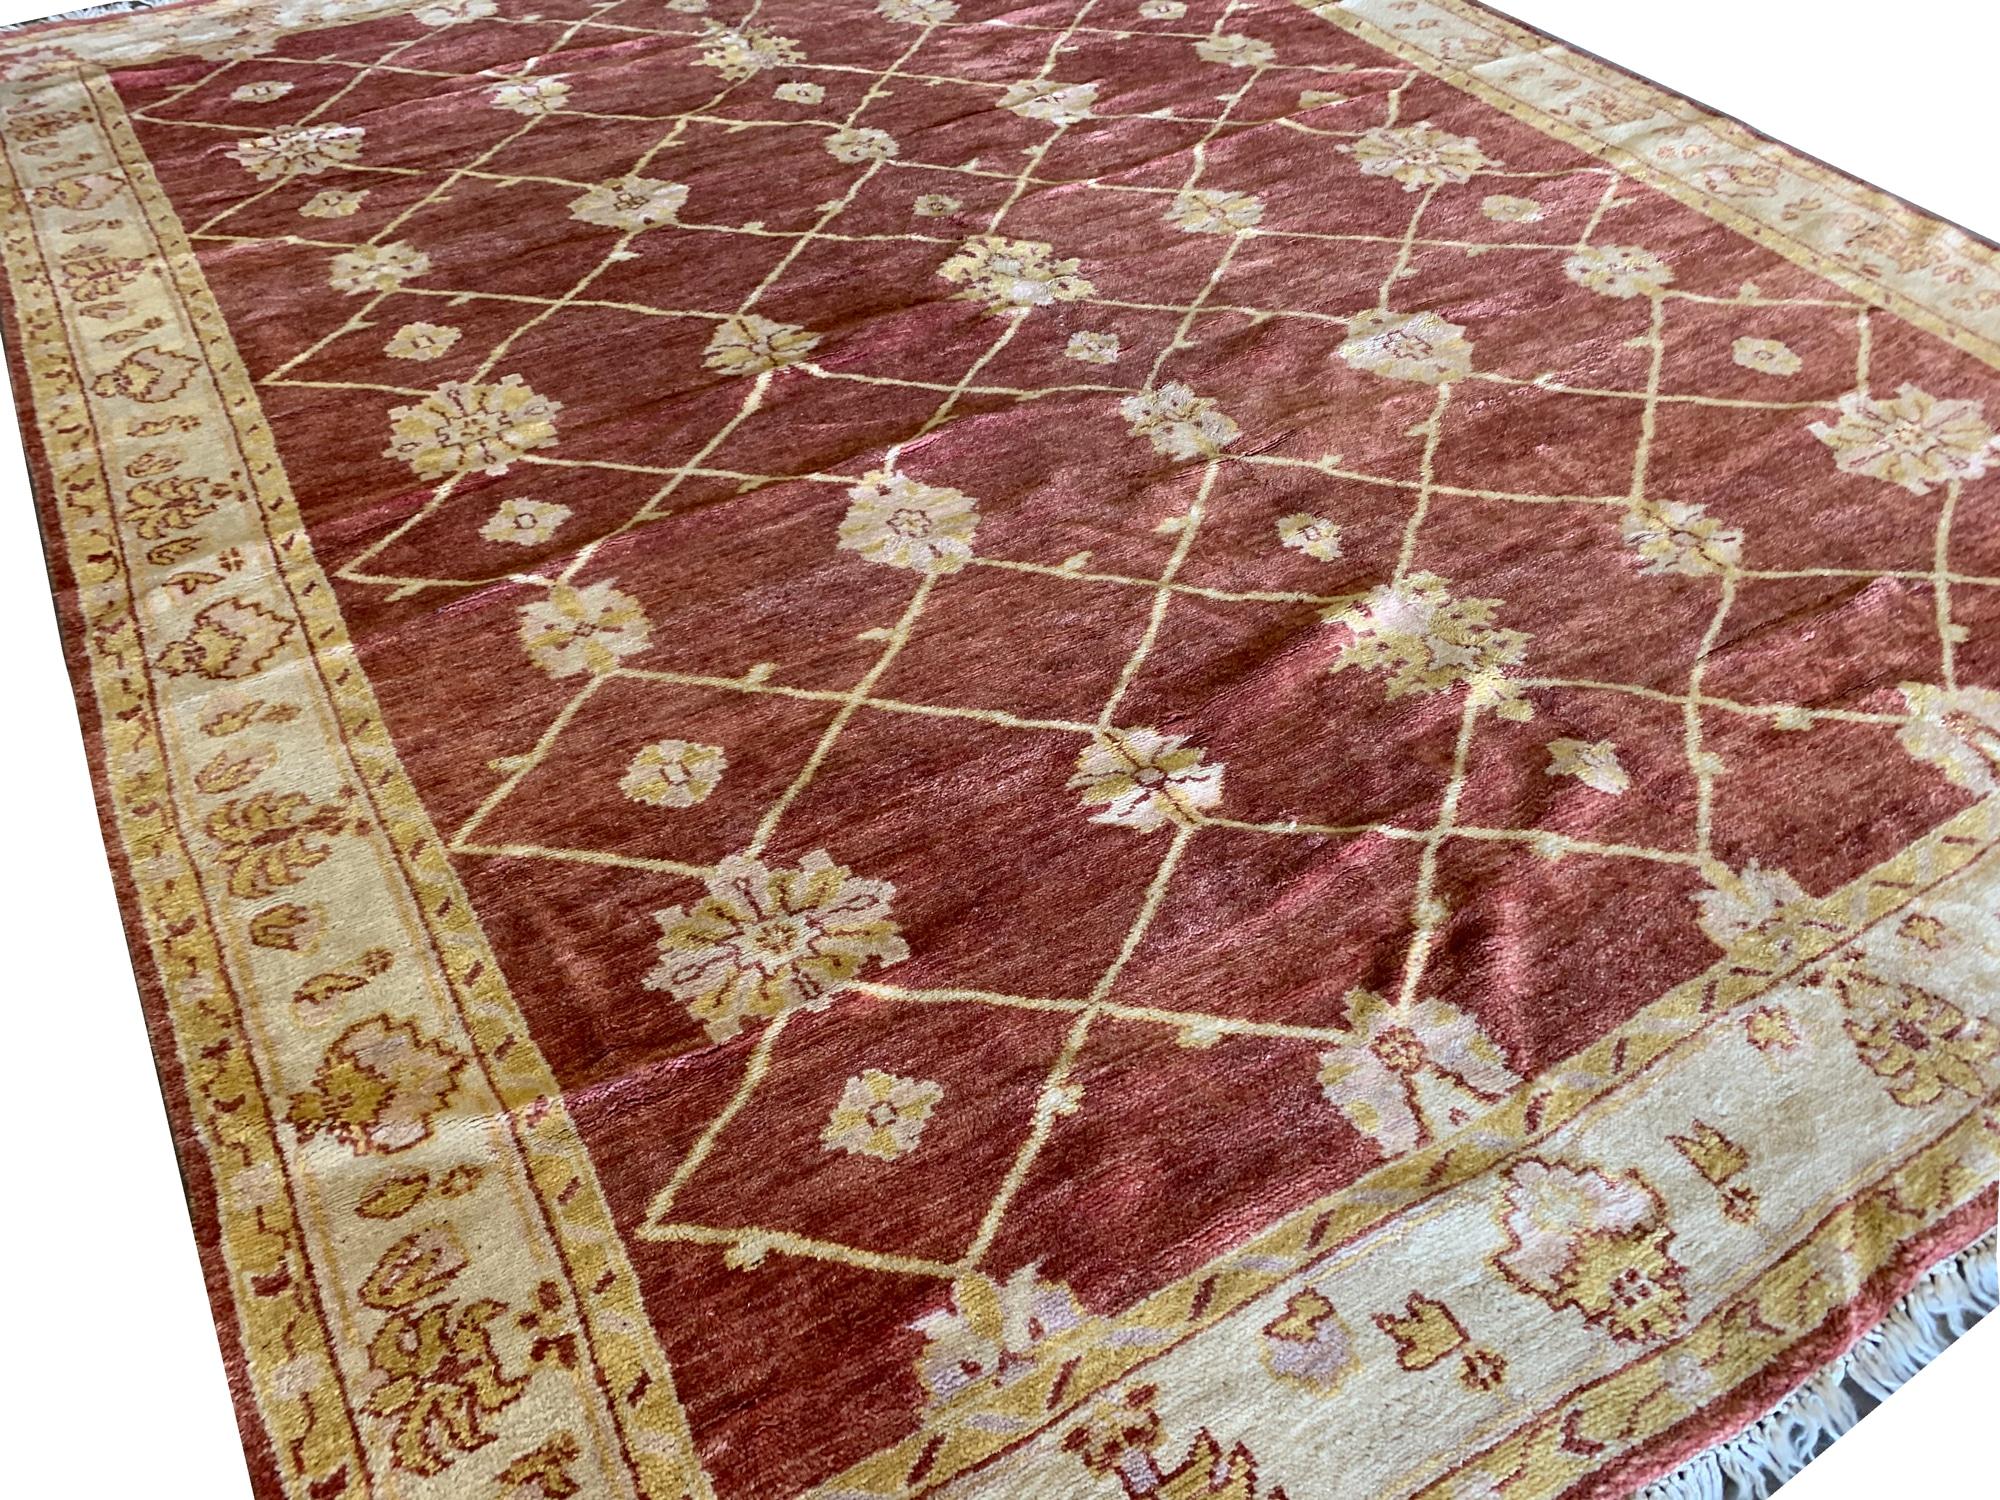 This Indian Ziegler rug is a masterpiece of timeless elegance and artisanal craftsmanship. Hand-knotted with meticulous precision, this vintage carpet boasts a blend of rich red and subtle beige tones, adding warmth and sophistication to any space.
